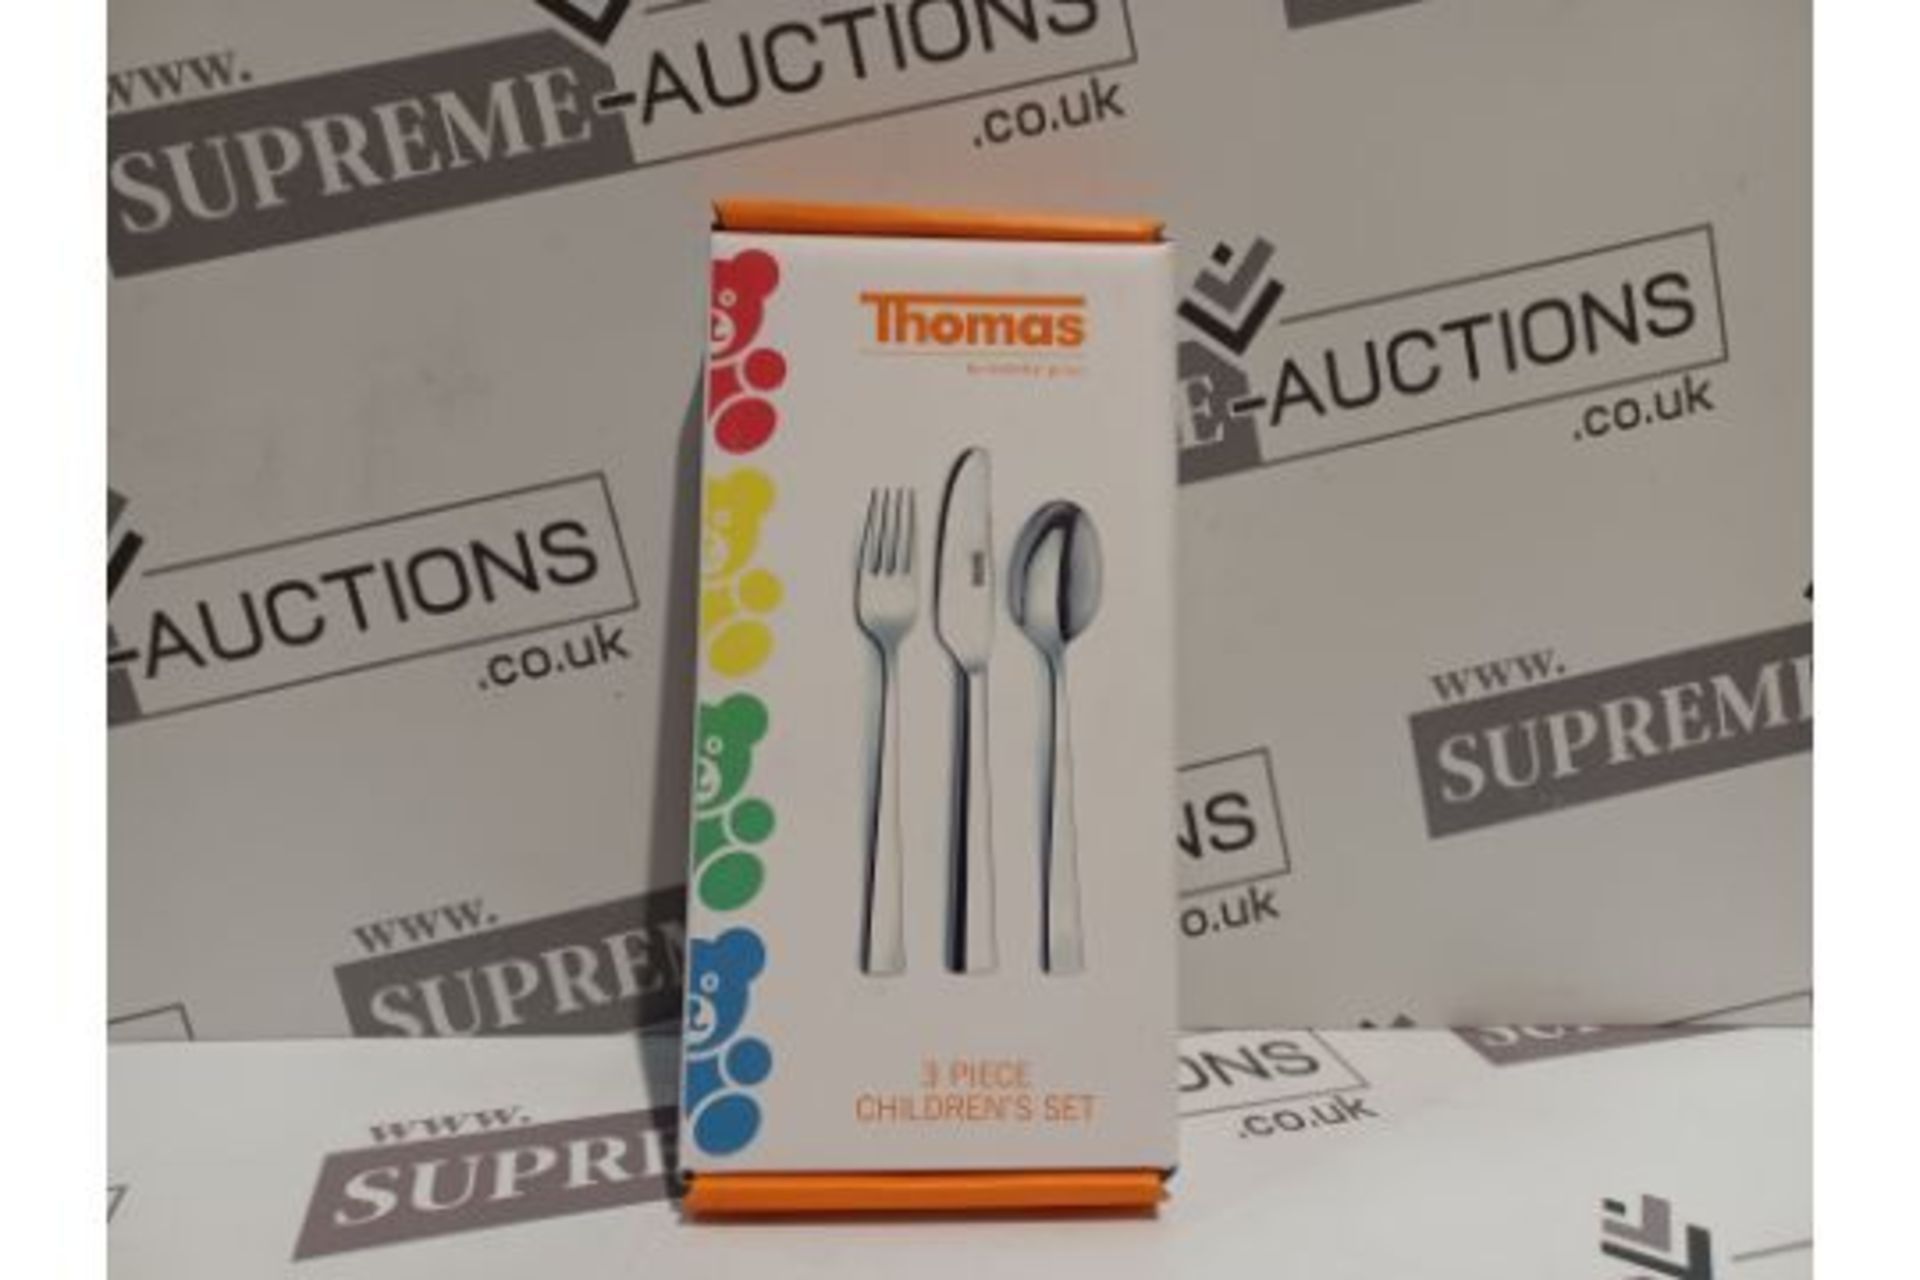 TRADE LOT 240 X BRAND NEW THOMAS BY ROSENTHAL 3 PIECE CHILDRENS CUTLERY SET R13